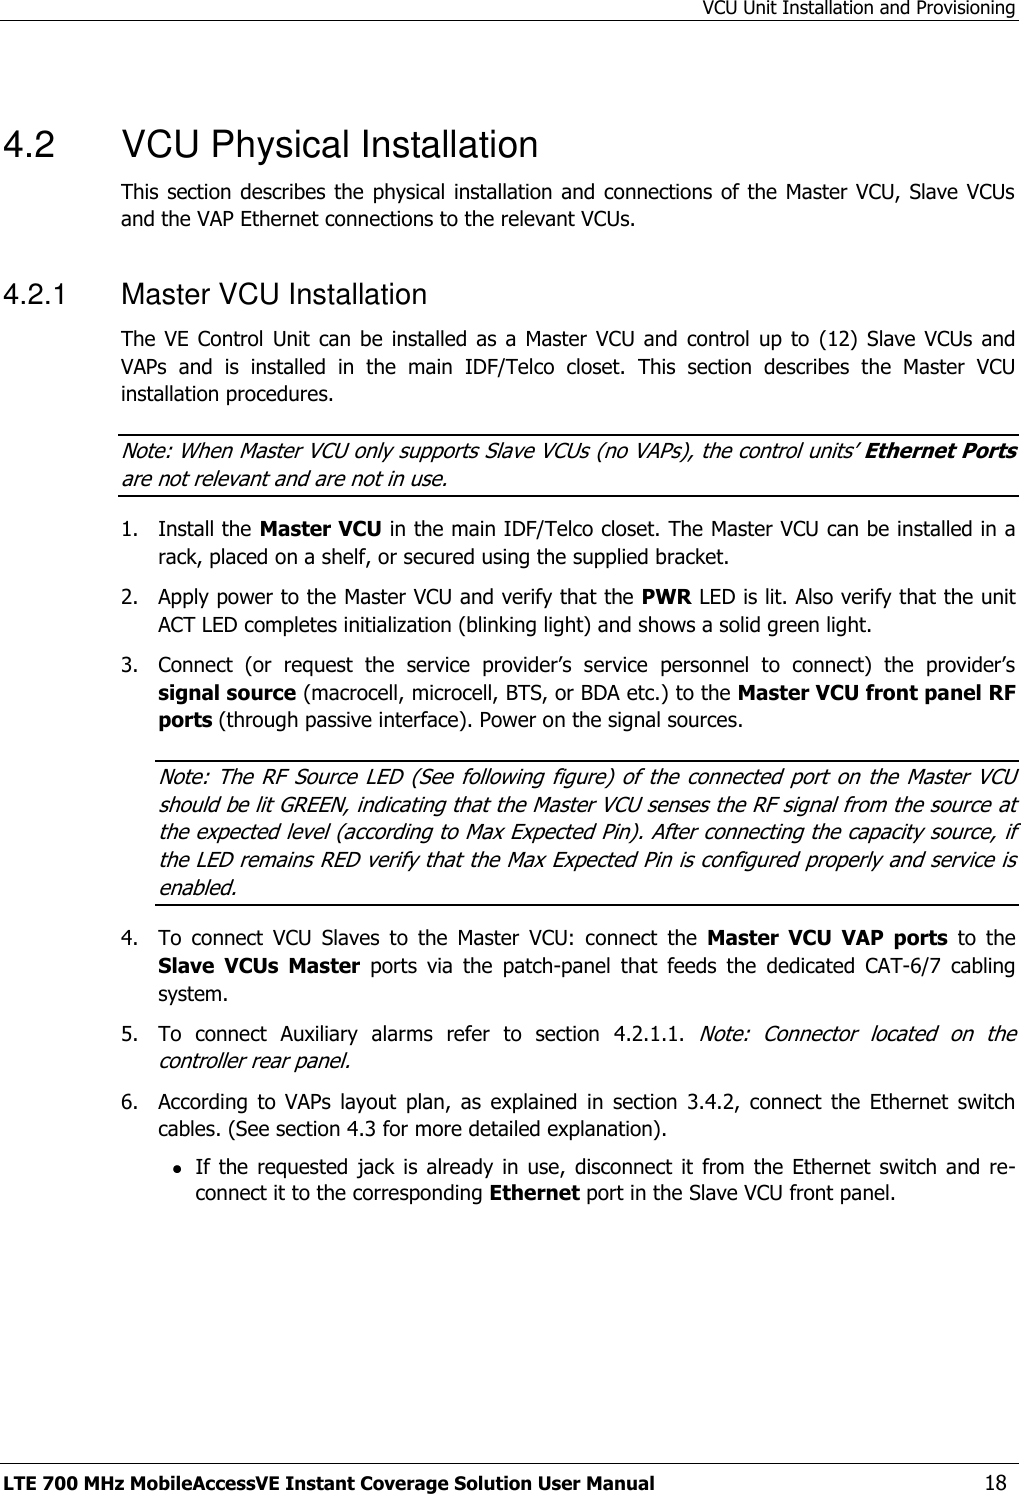 VCU Unit Installation and Provisioning LTE 700 MHz MobileAccessVE Instant Coverage Solution User Manual  18  4.2  VCU Physical Installation This section describes the  physical installation and  connections of the Master  VCU, Slave VCUs and the VAP Ethernet connections to the relevant VCUs. 4.2.1  Master VCU Installation The VE  Control  Unit  can  be  installed as  a  Master VCU and  control  up to  (12)  Slave  VCUs  and VAPs  and  is  installed  in  the  main  IDF/Telco  closet.  This  section  describes  the  Master  VCU installation procedures. Note: When Master VCU only supports Slave VCUs (no VAPs), the control units’ Ethernet Ports are not relevant and are not in use. 1.  Install the Master VCU in the main IDF/Telco closet. The Master VCU can be installed in a rack, placed on a shelf, or secured using the supplied bracket. 2.  Apply power to the Master VCU and verify that the PWR LED is lit. Also verify that the unit ACT LED completes initialization (blinking light) and shows a solid green light. 3.  Connect  (or  request  the  service  provider’s  service  personnel  to  connect)  the  provider’s signal source (macrocell, microcell, BTS, or BDA etc.) to the Master VCU front panel RF ports (through passive interface). Power on the signal sources. Note: The RF  Source LED  (See  following figure)  of  the connected  port on  the Master  VCU should be lit GREEN, indicating that the Master VCU senses the RF signal from the source at the expected level (according to Max Expected Pin). After connecting the capacity source, if the LED remains RED verify that the Max Expected Pin is configured properly and service is enabled. 4.  To  connect  VCU  Slaves  to  the  Master  VCU:  connect  the  Master  VCU VAP  ports  to  the Slave VCUs  Master  ports  via  the  patch-panel  that  feeds  the  dedicated  CAT-6/7  cabling system. 5.  To  connect  Auxiliary  alarms  refer  to  section  4.2.1.1. Note:  Connector  located  on  the controller rear panel. 6.  According  to  VAPs  layout  plan,  as  explained  in  section  3.4.2,  connect  the  Ethernet  switch cables. (See section 4.3 for more detailed explanation).  If the  requested  jack is already in  use,  disconnect  it from  the Ethernet  switch  and  re-connect it to the corresponding Ethernet port in the Slave VCU front panel. 